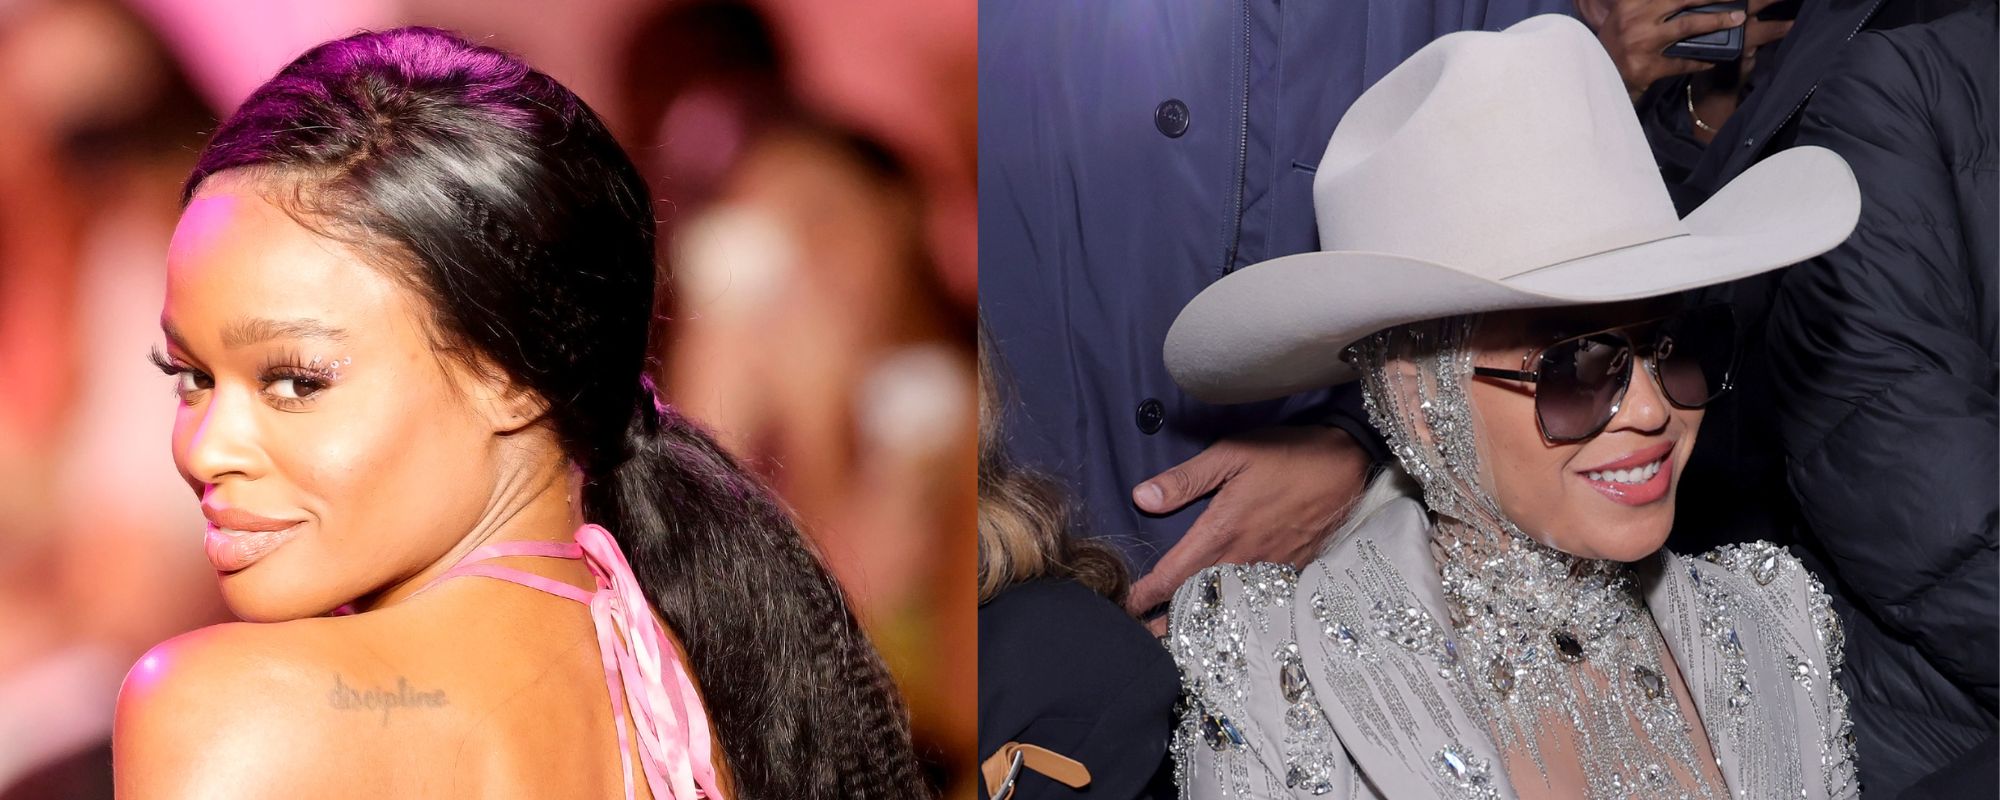 Azealia Banks Shares Opinions Sparking Commentary on Beyoncé’s Shift to Country Music: “It’s Giving Big Time Musical Grift”